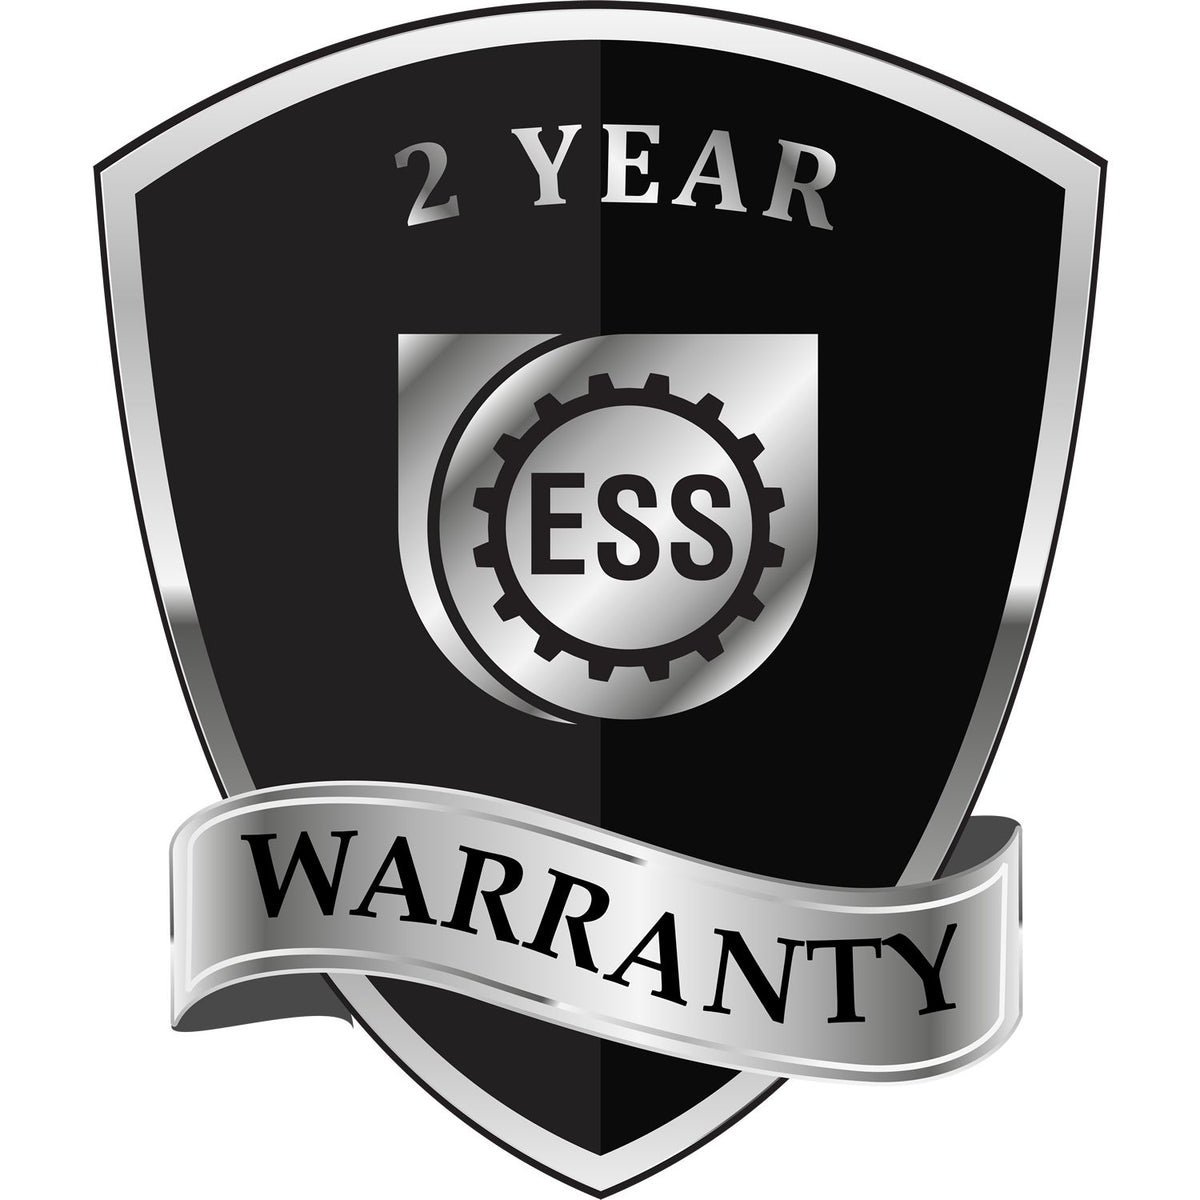 A badge or emblem showing a warranty icon for the Soft Texas Professional Engineer Seal